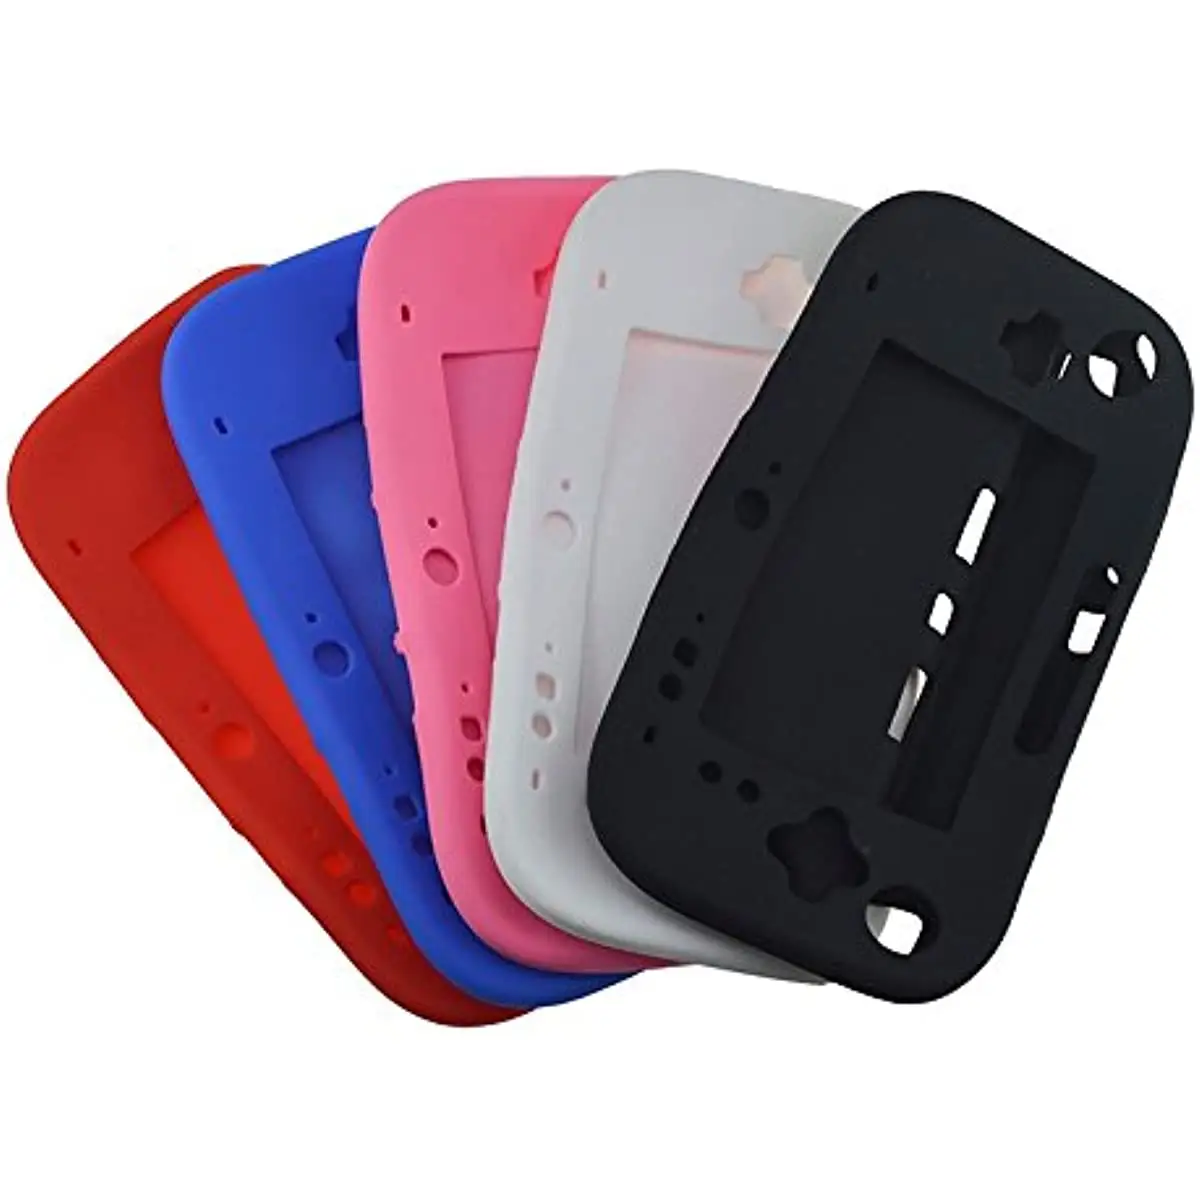 NSLikey Silicone Skin for Wii U Gamepad Soft Silicone Rubber Full Body Protector Cover Skin Shell Soft Case